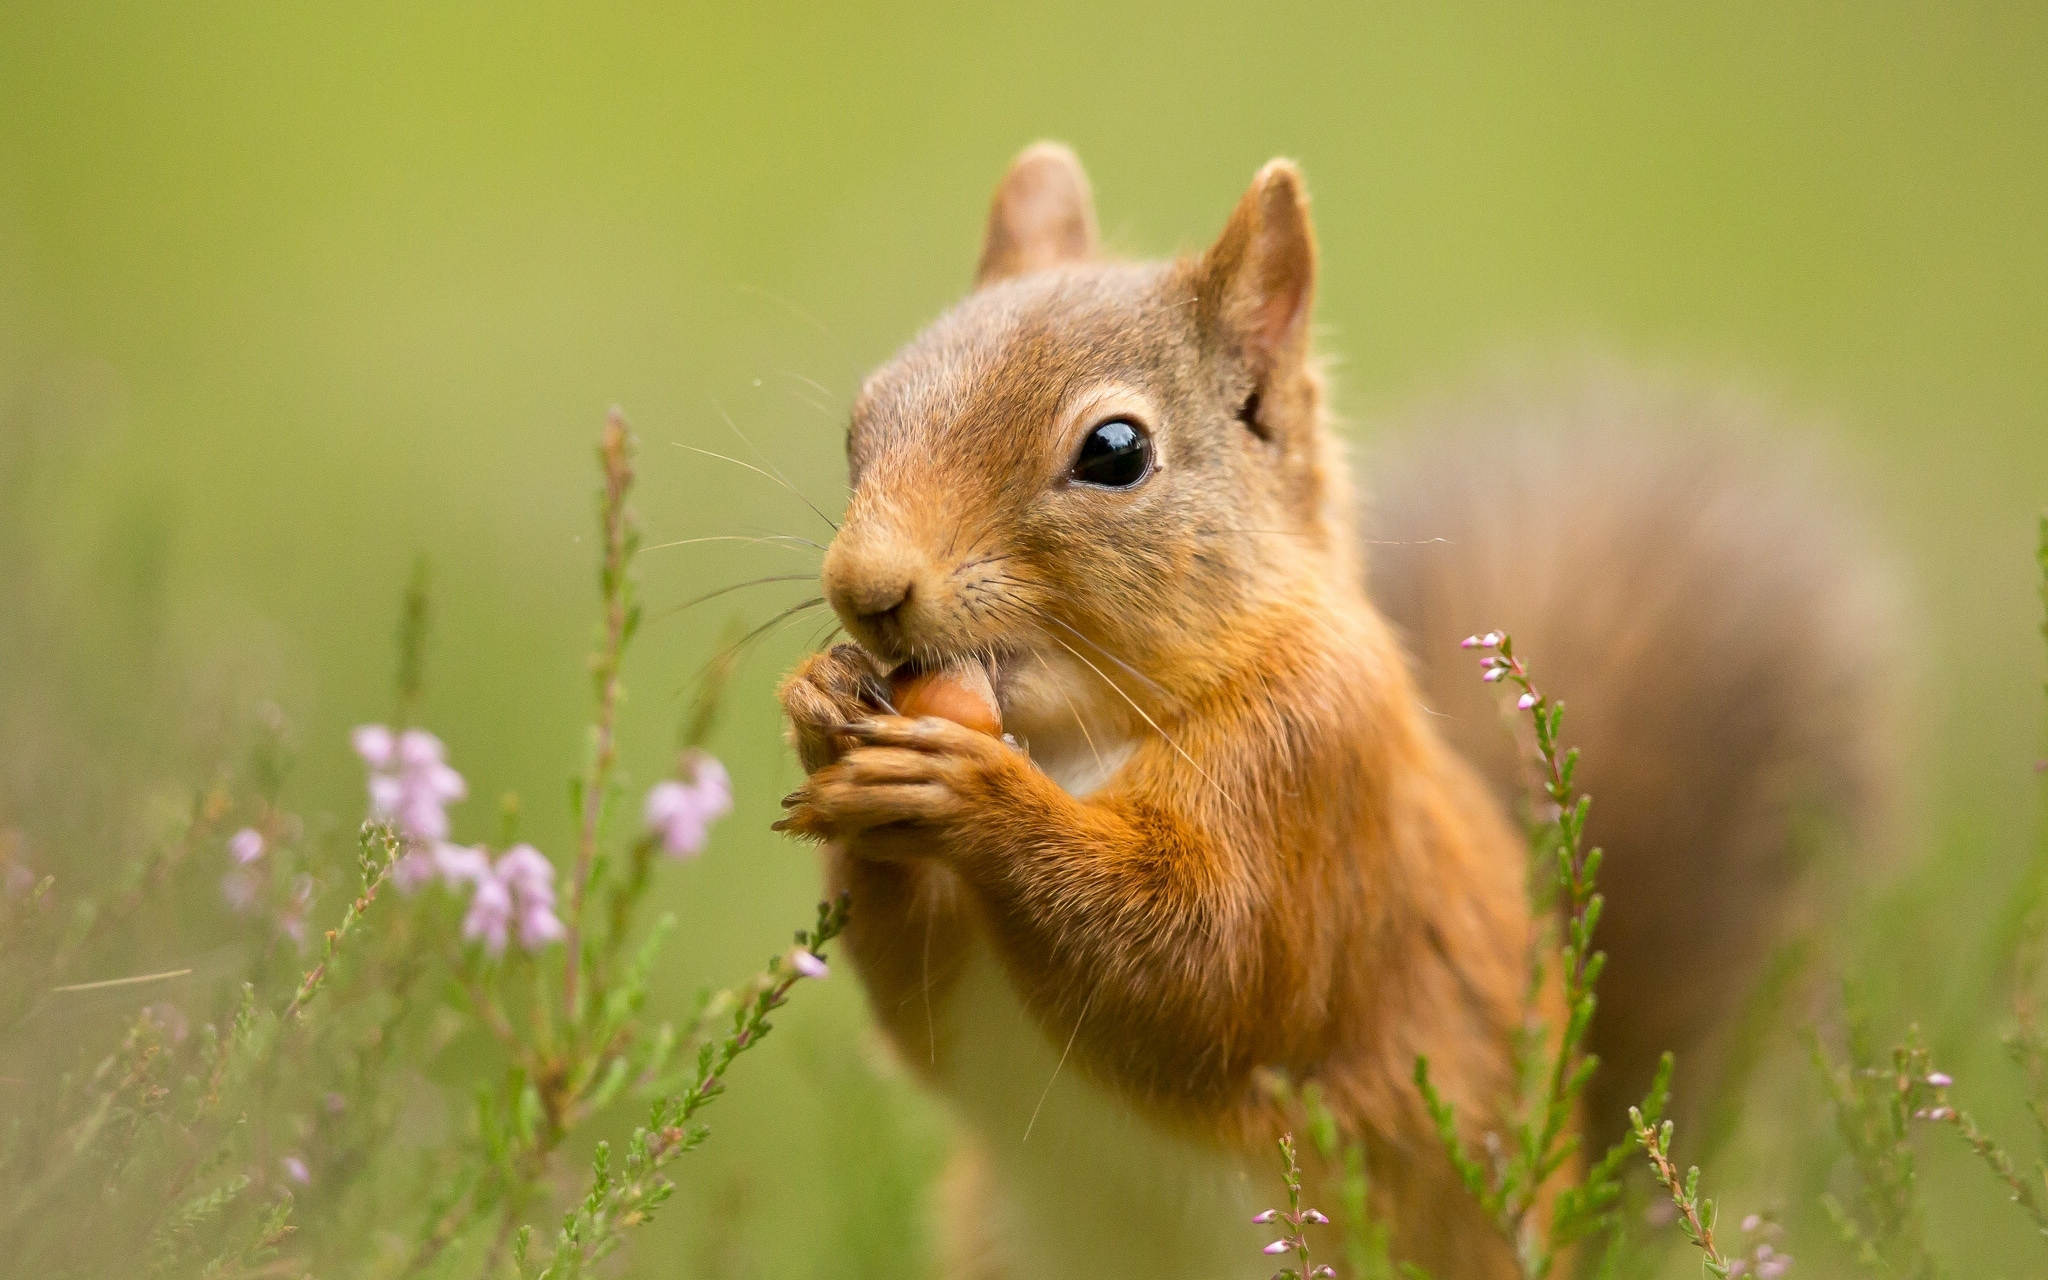 African Bush Squirrel Wallpaper Image Background | HD Wallpapers ...